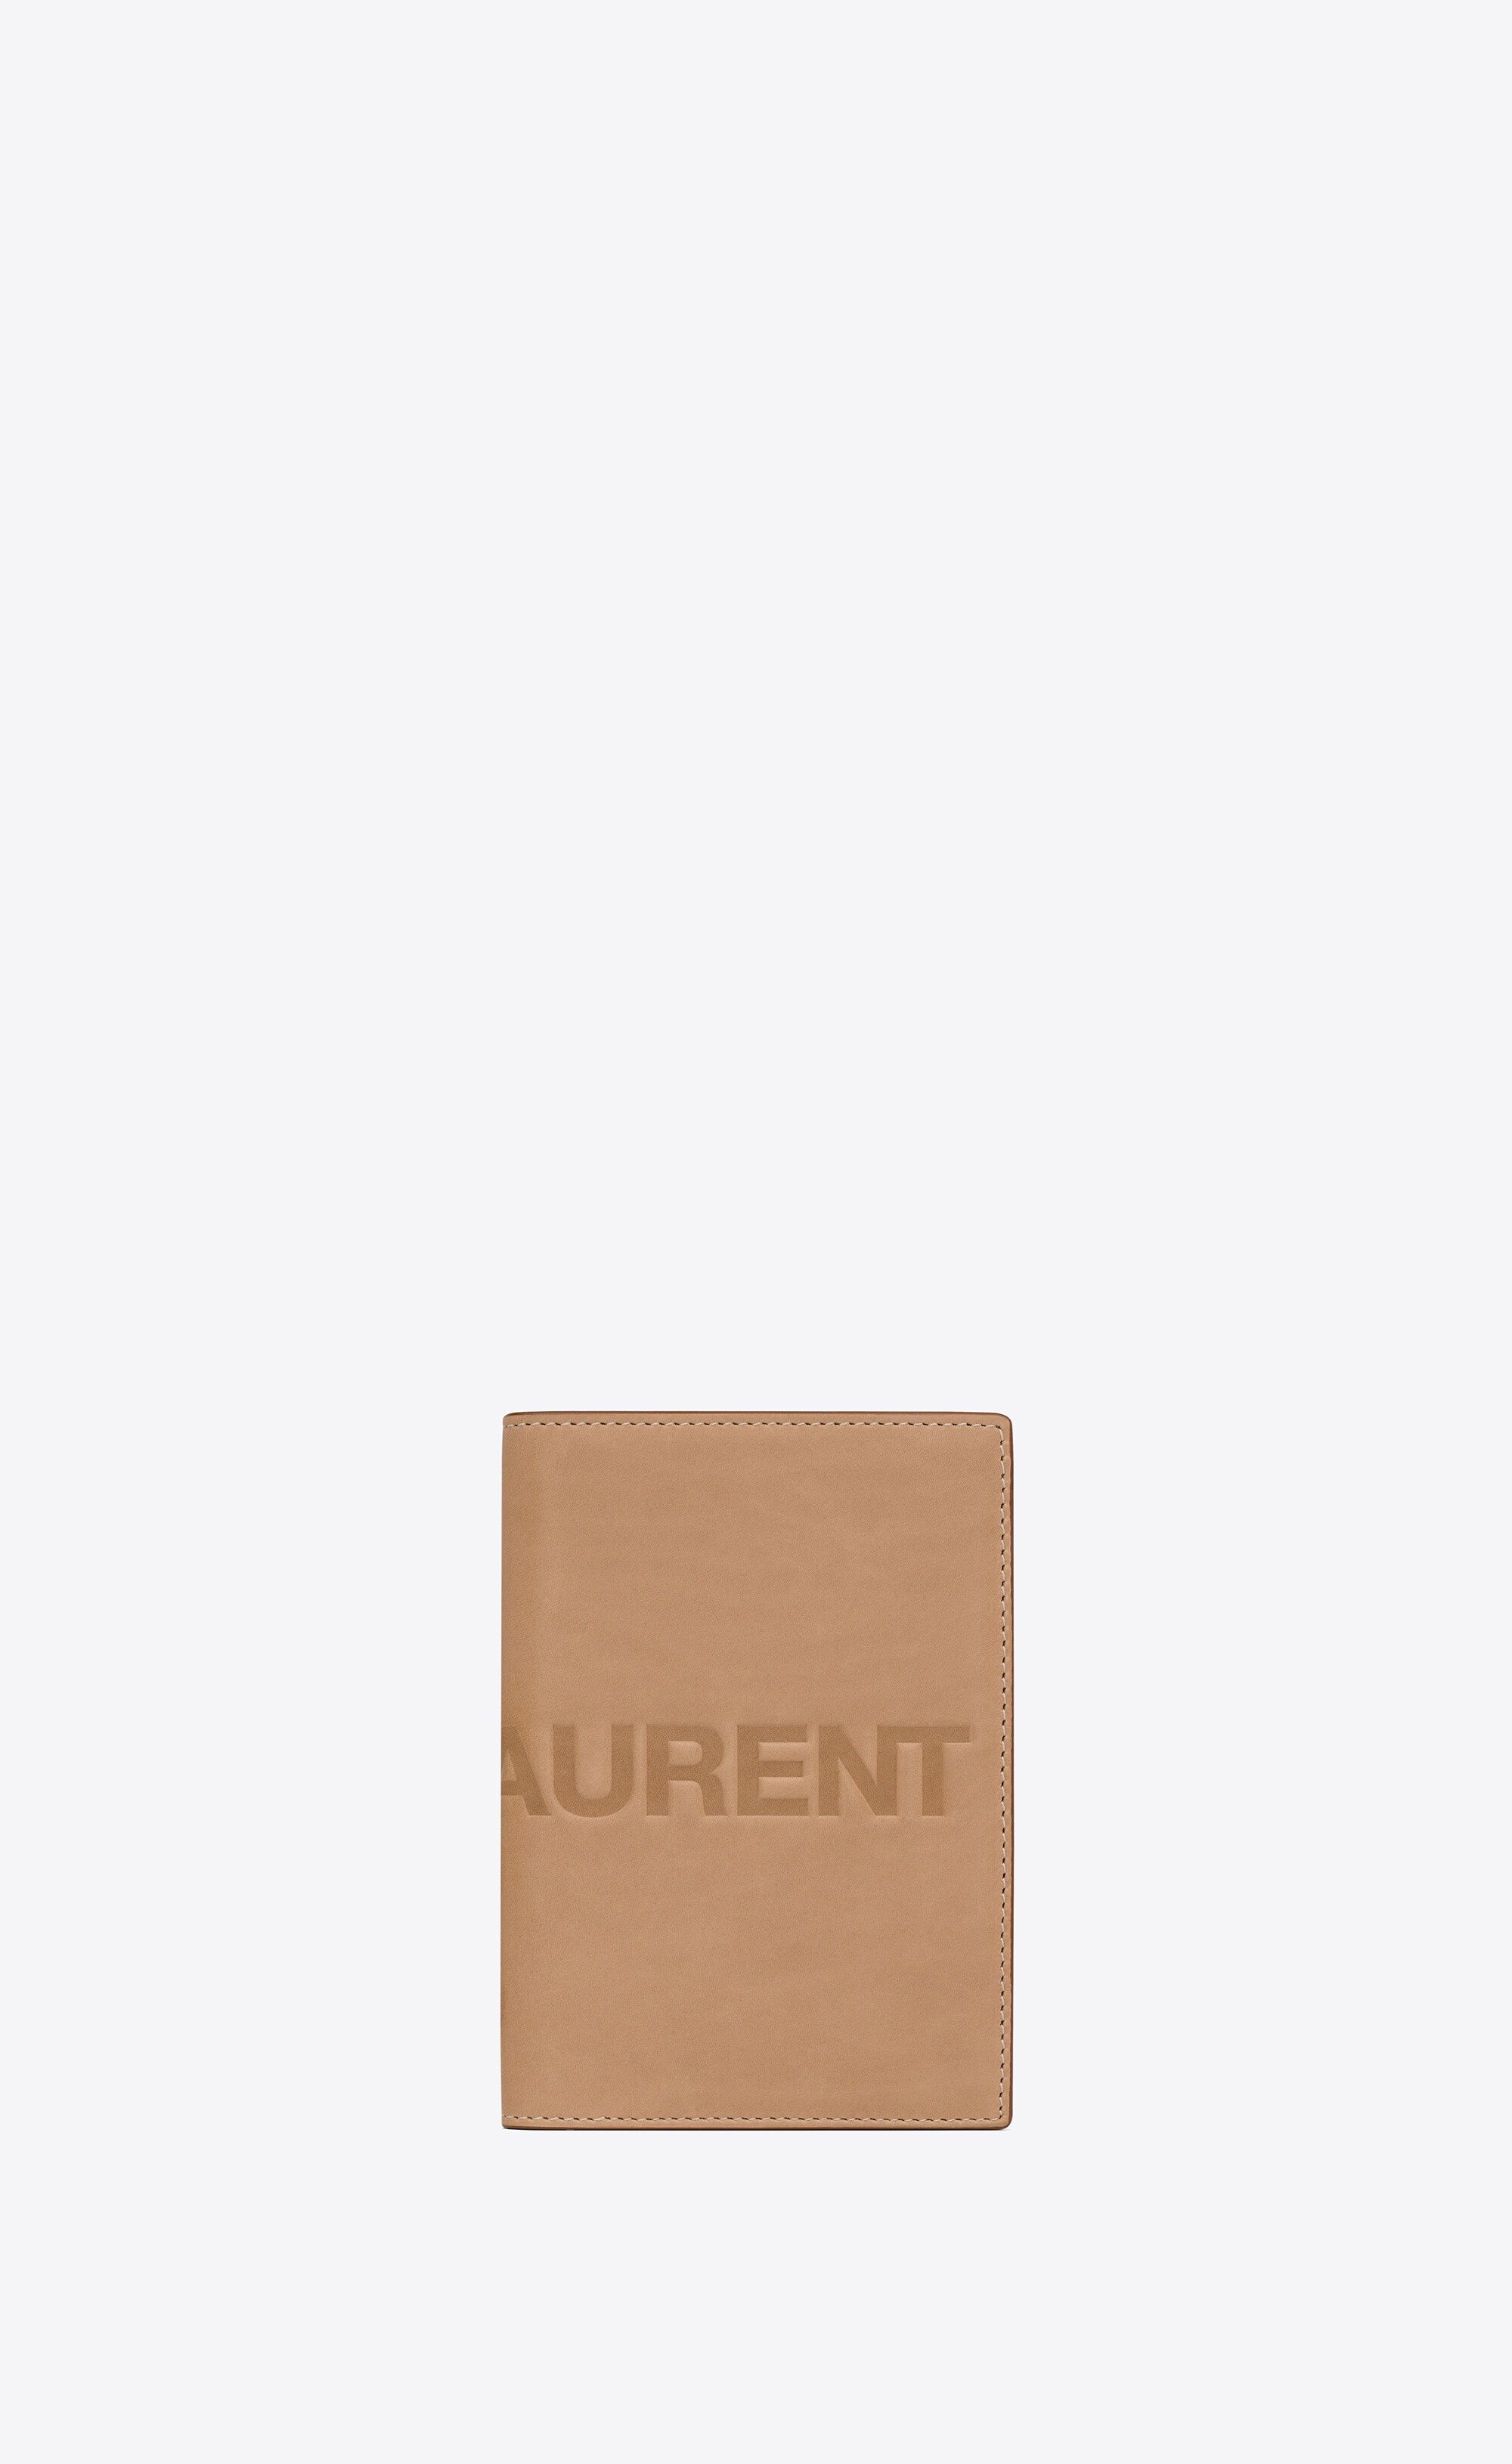 saint laurent passport case in vegetable-tanned leather - 1